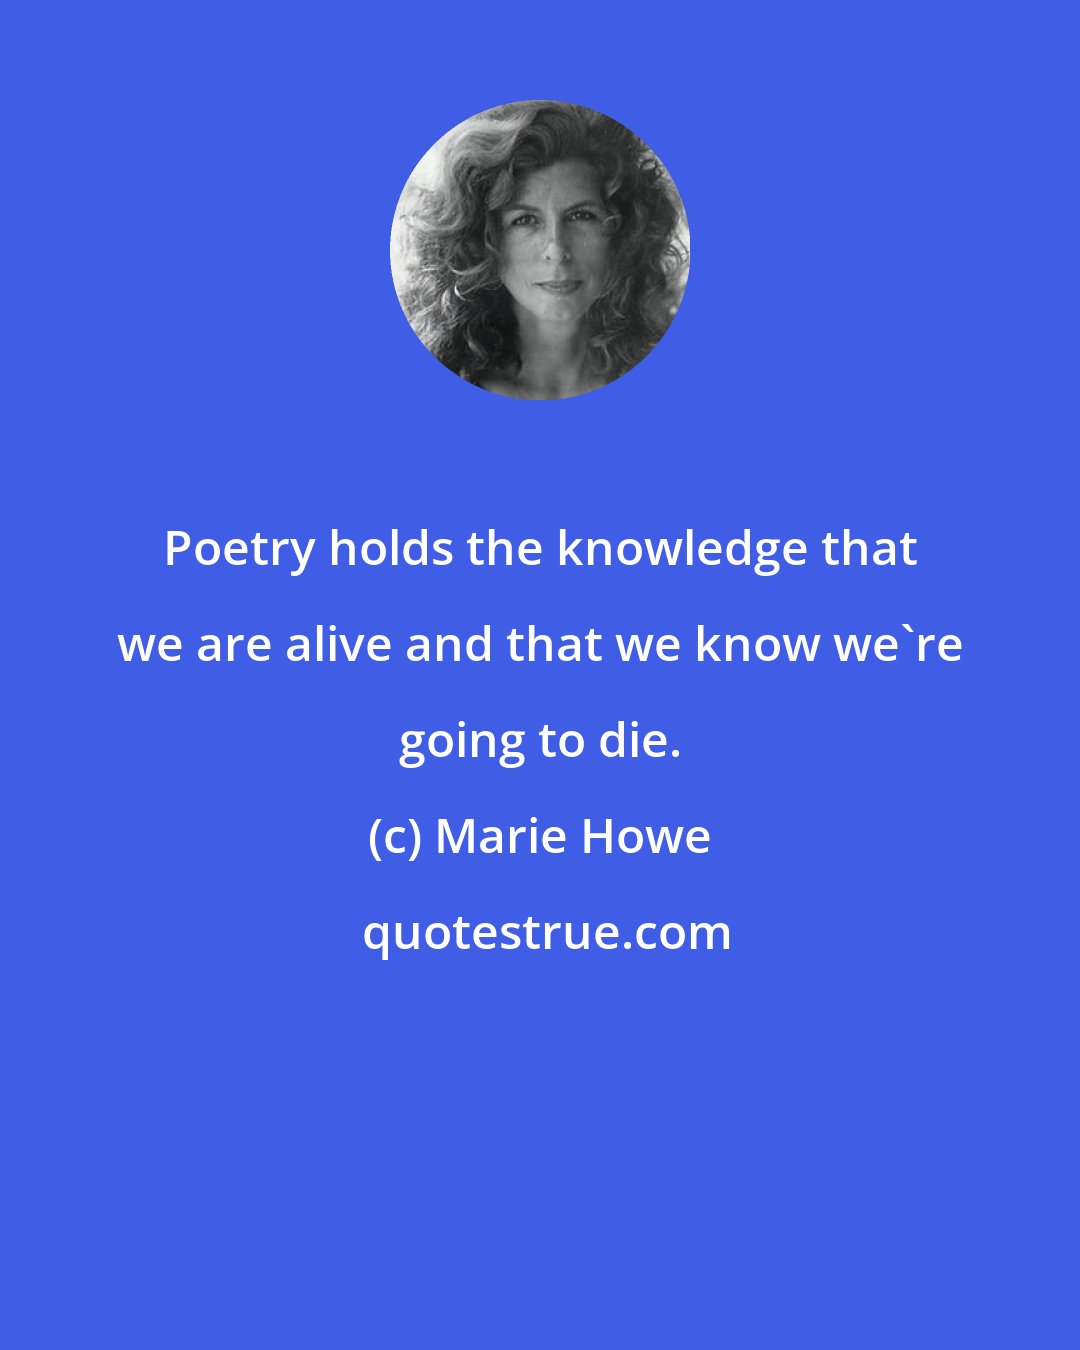 Marie Howe: Poetry holds the knowledge that we are alive and that we know we're going to die.